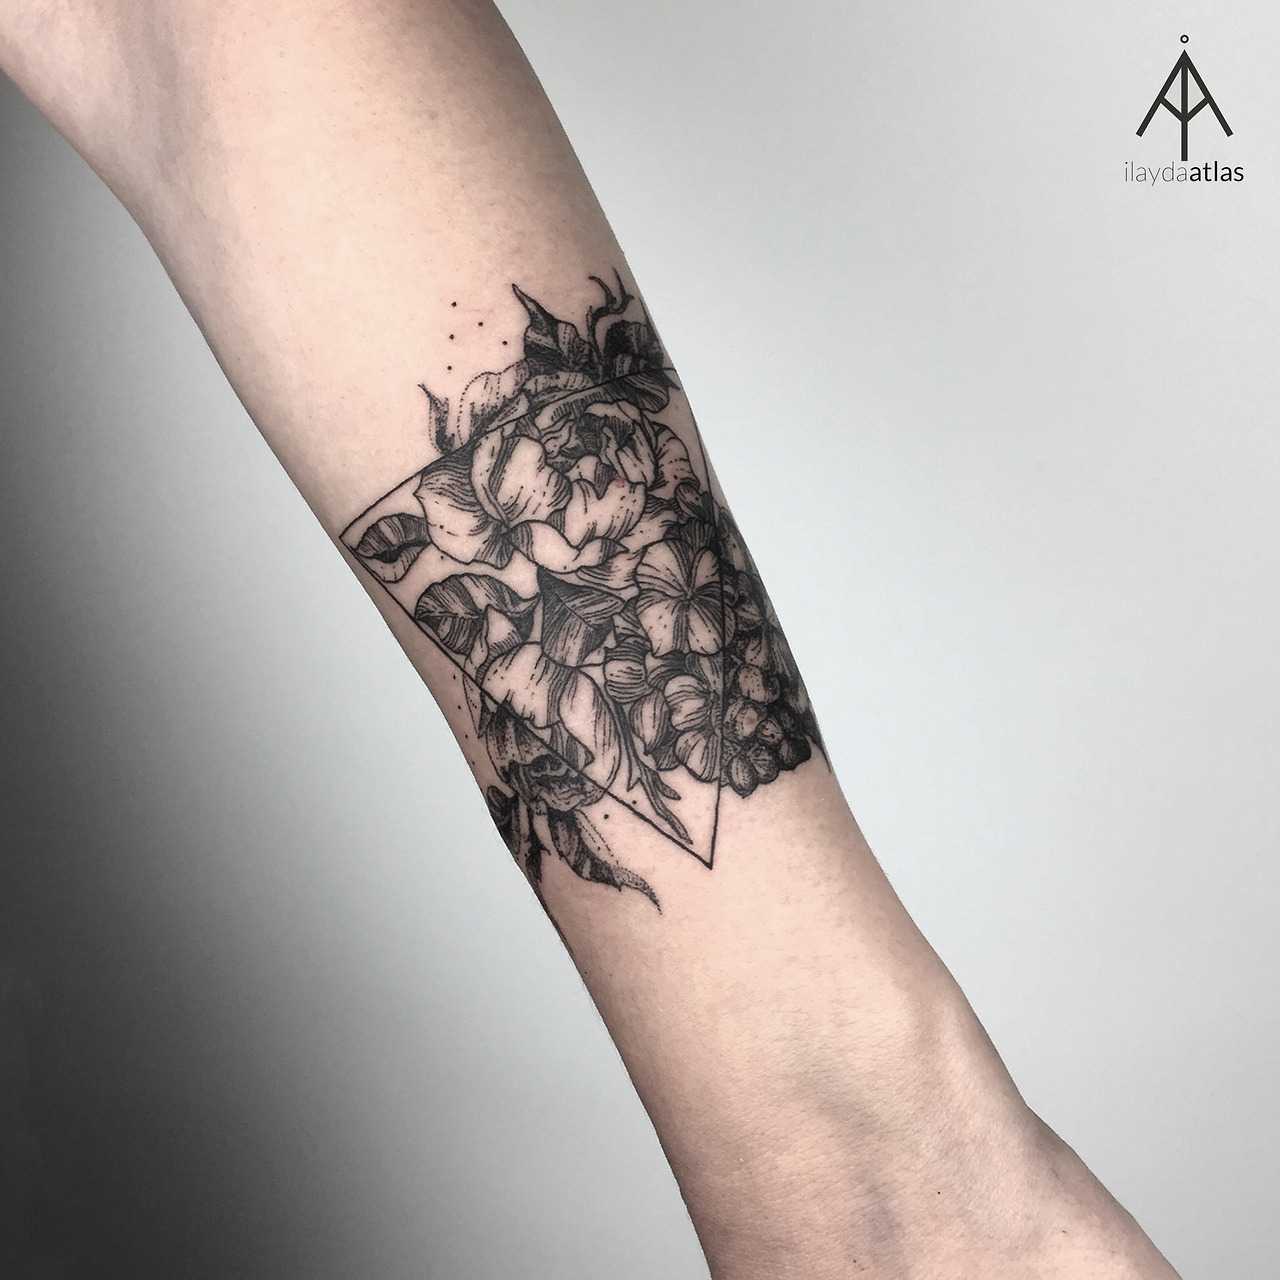 Flower and triangle tattoo by Ilayda Atlas